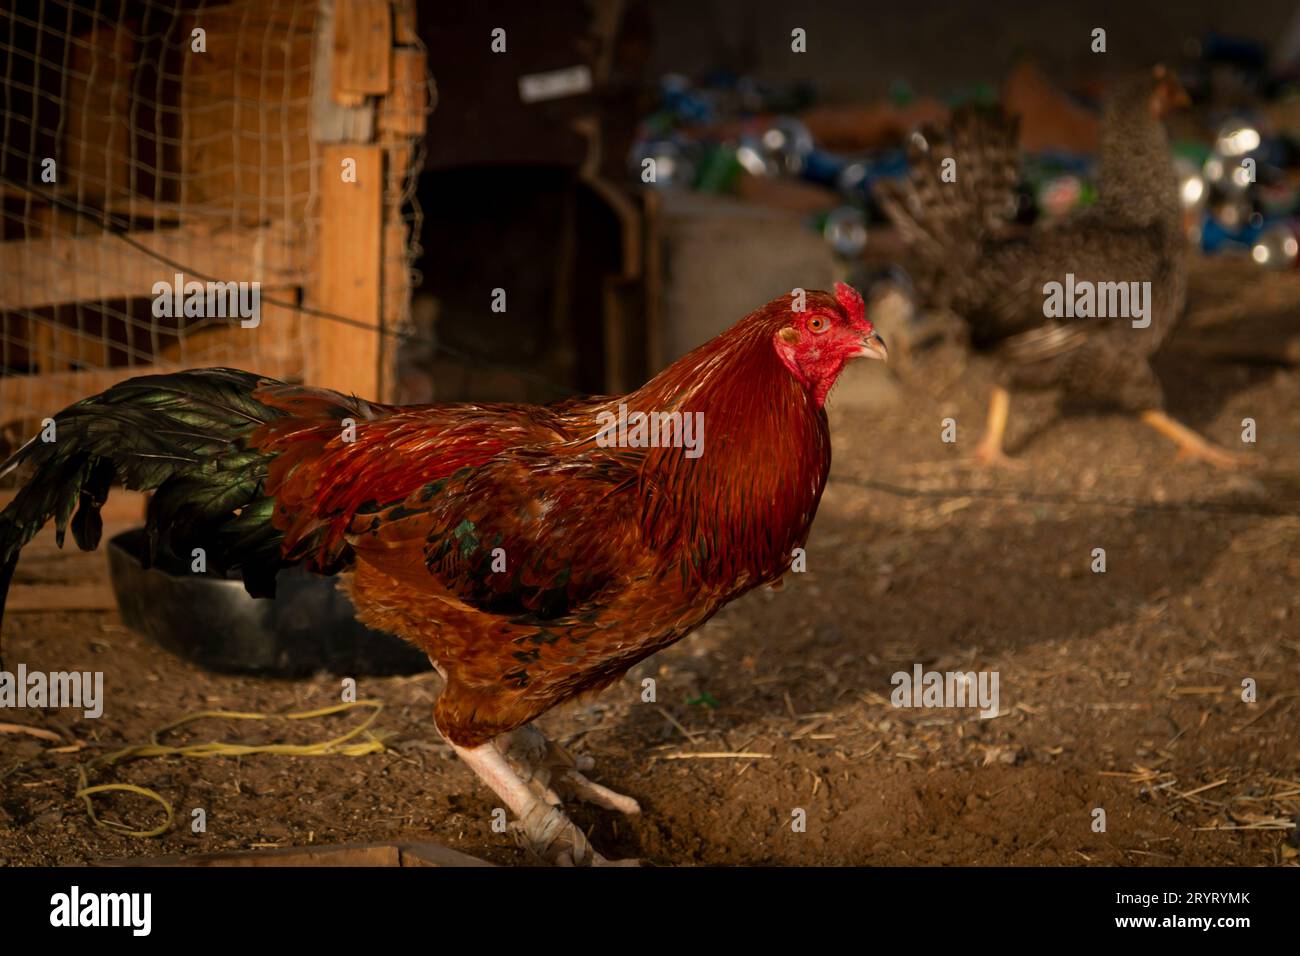 Hen at poultry farm early morning. Stock Photo